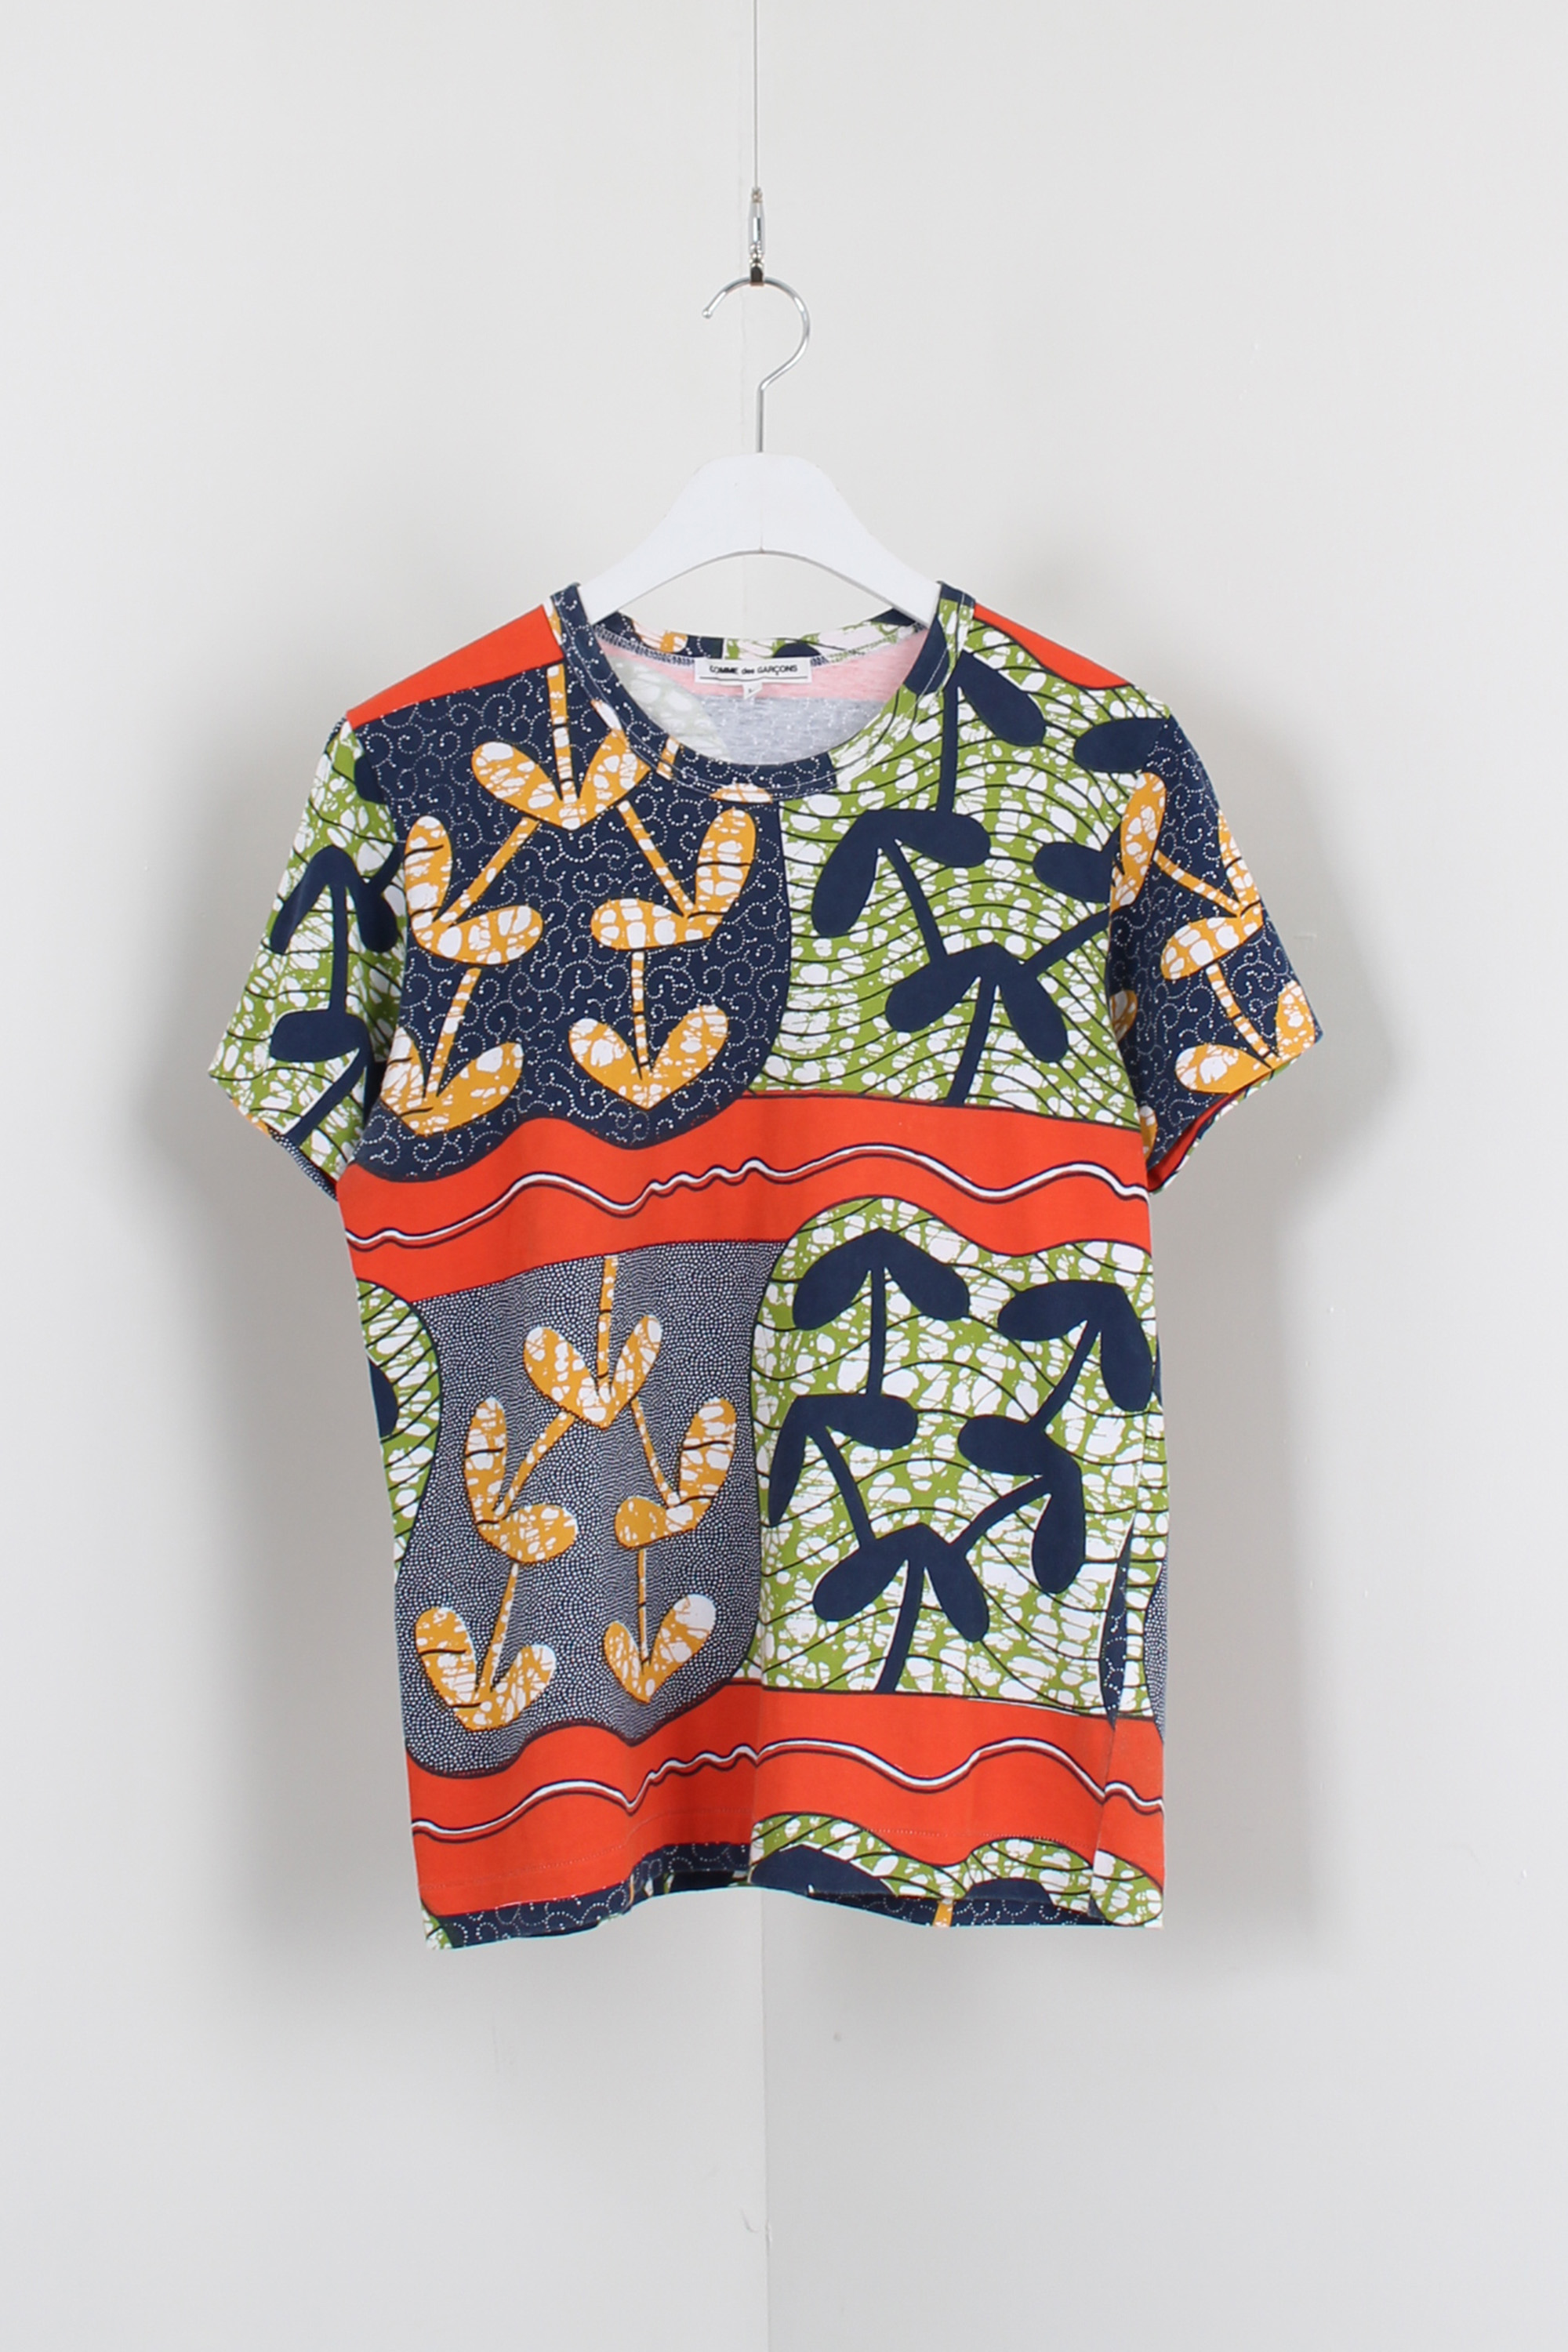 Comme des Garcons full printed t-shirt